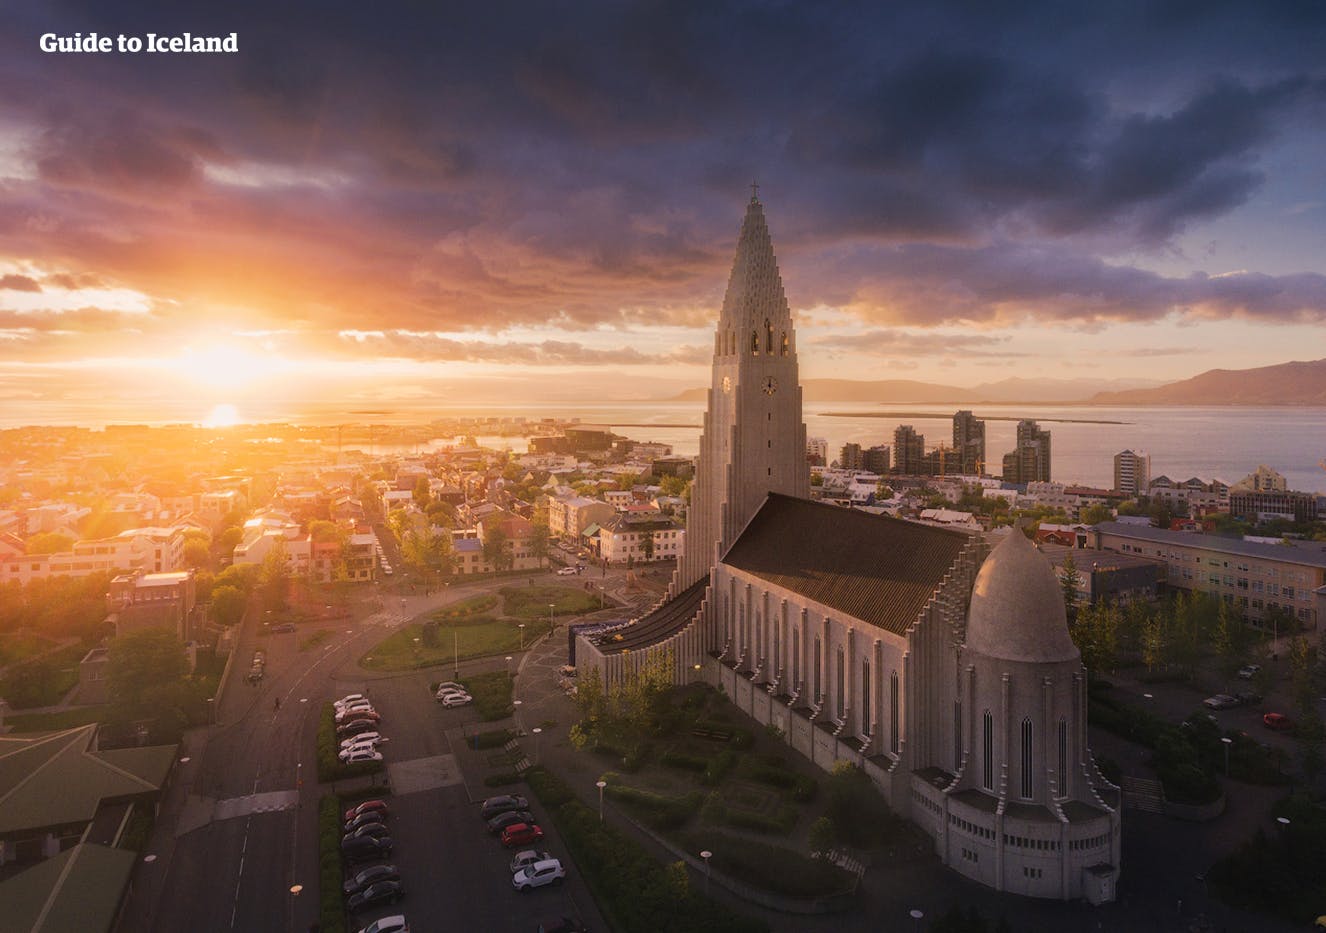 The capital of Iceland is located in the south-eastern corner of the country.